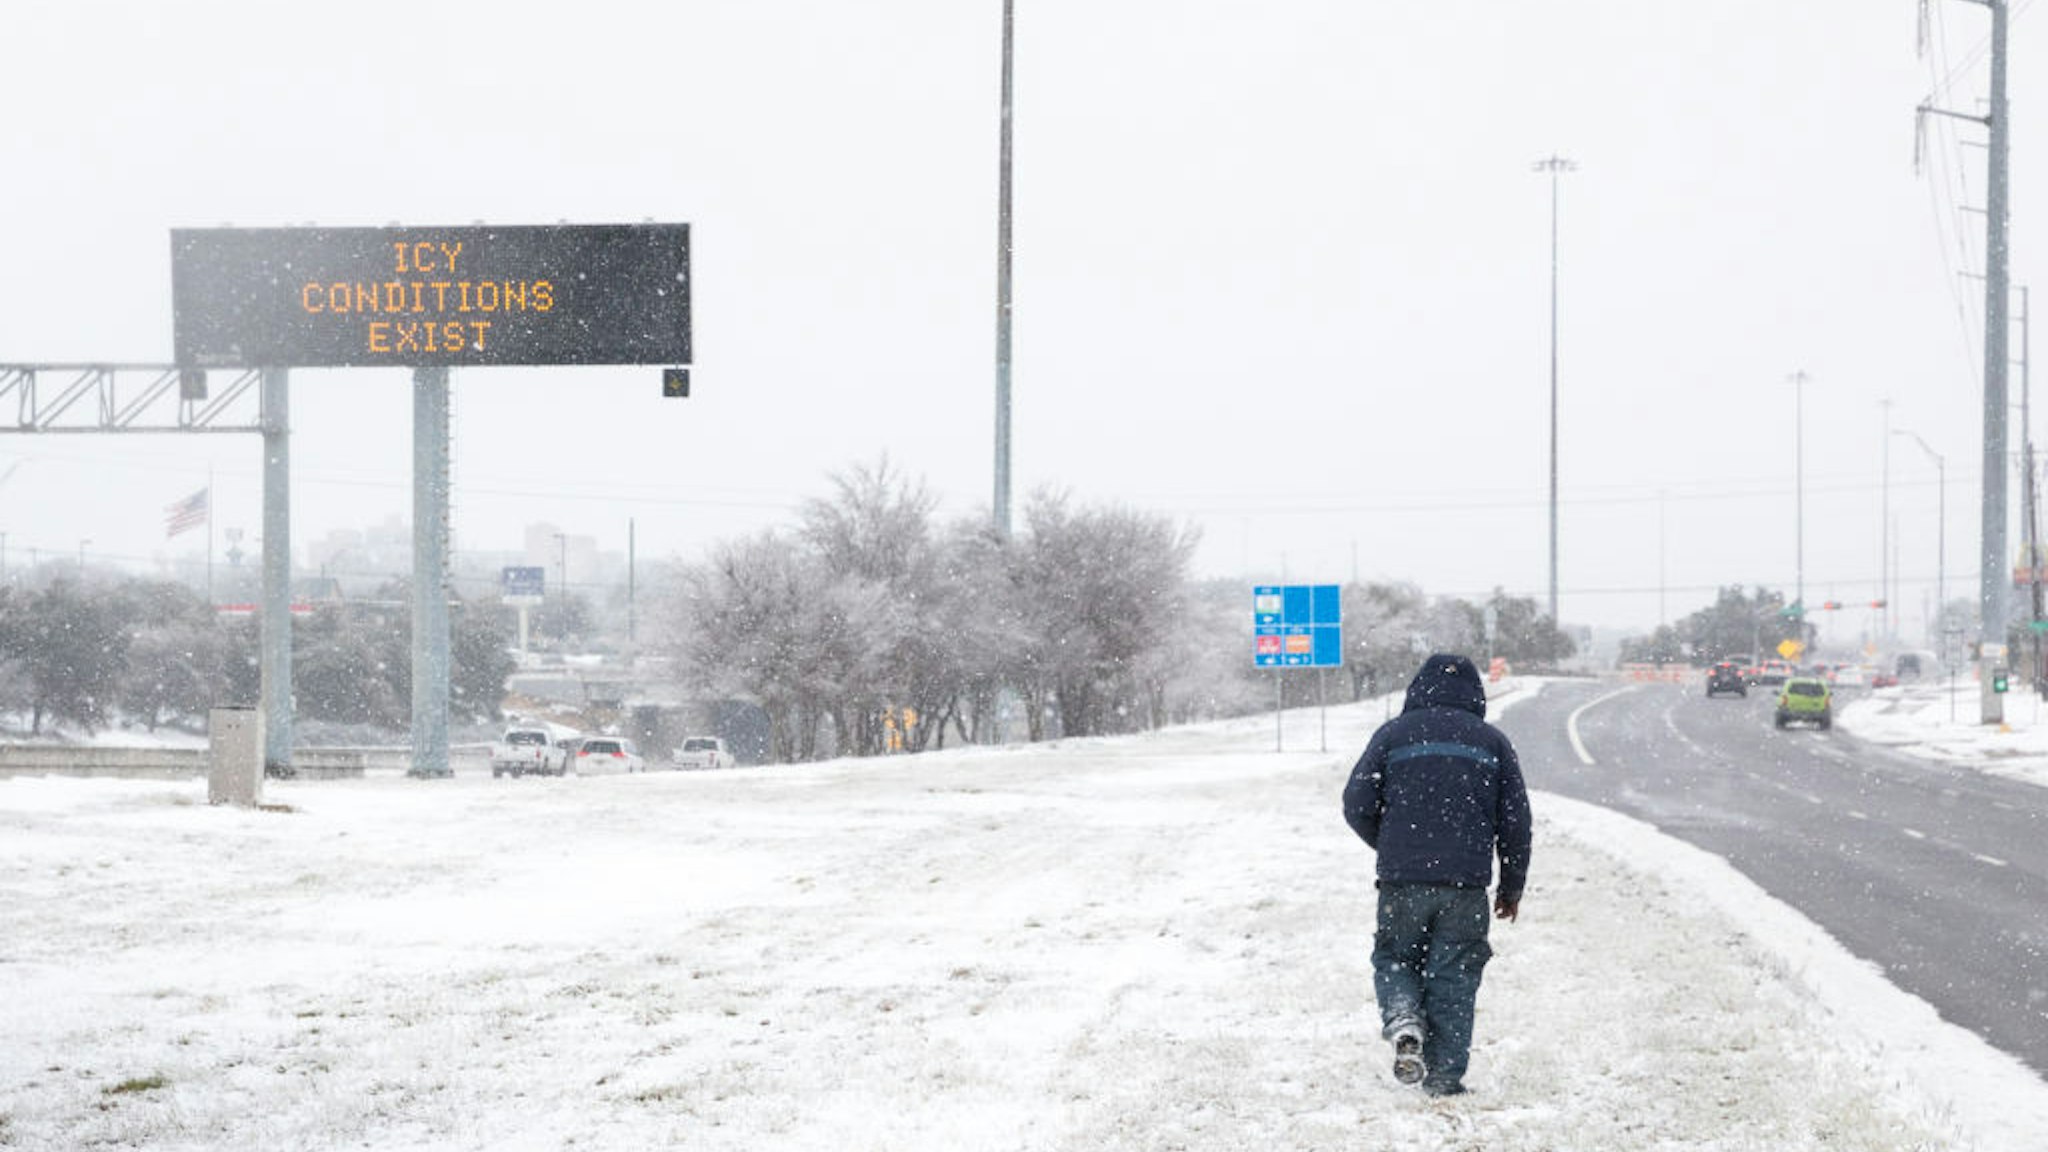 A pedestrians walks past a road sign warning commuters of icy conditions on a road in Austin, Texas, U.S., on Thursday, Feb. 18, 2021. Texas is restricting the flow of natural gas across state lines in an extraordinary move that some are calling a violation of the U.S. Constitutions commerce clause.